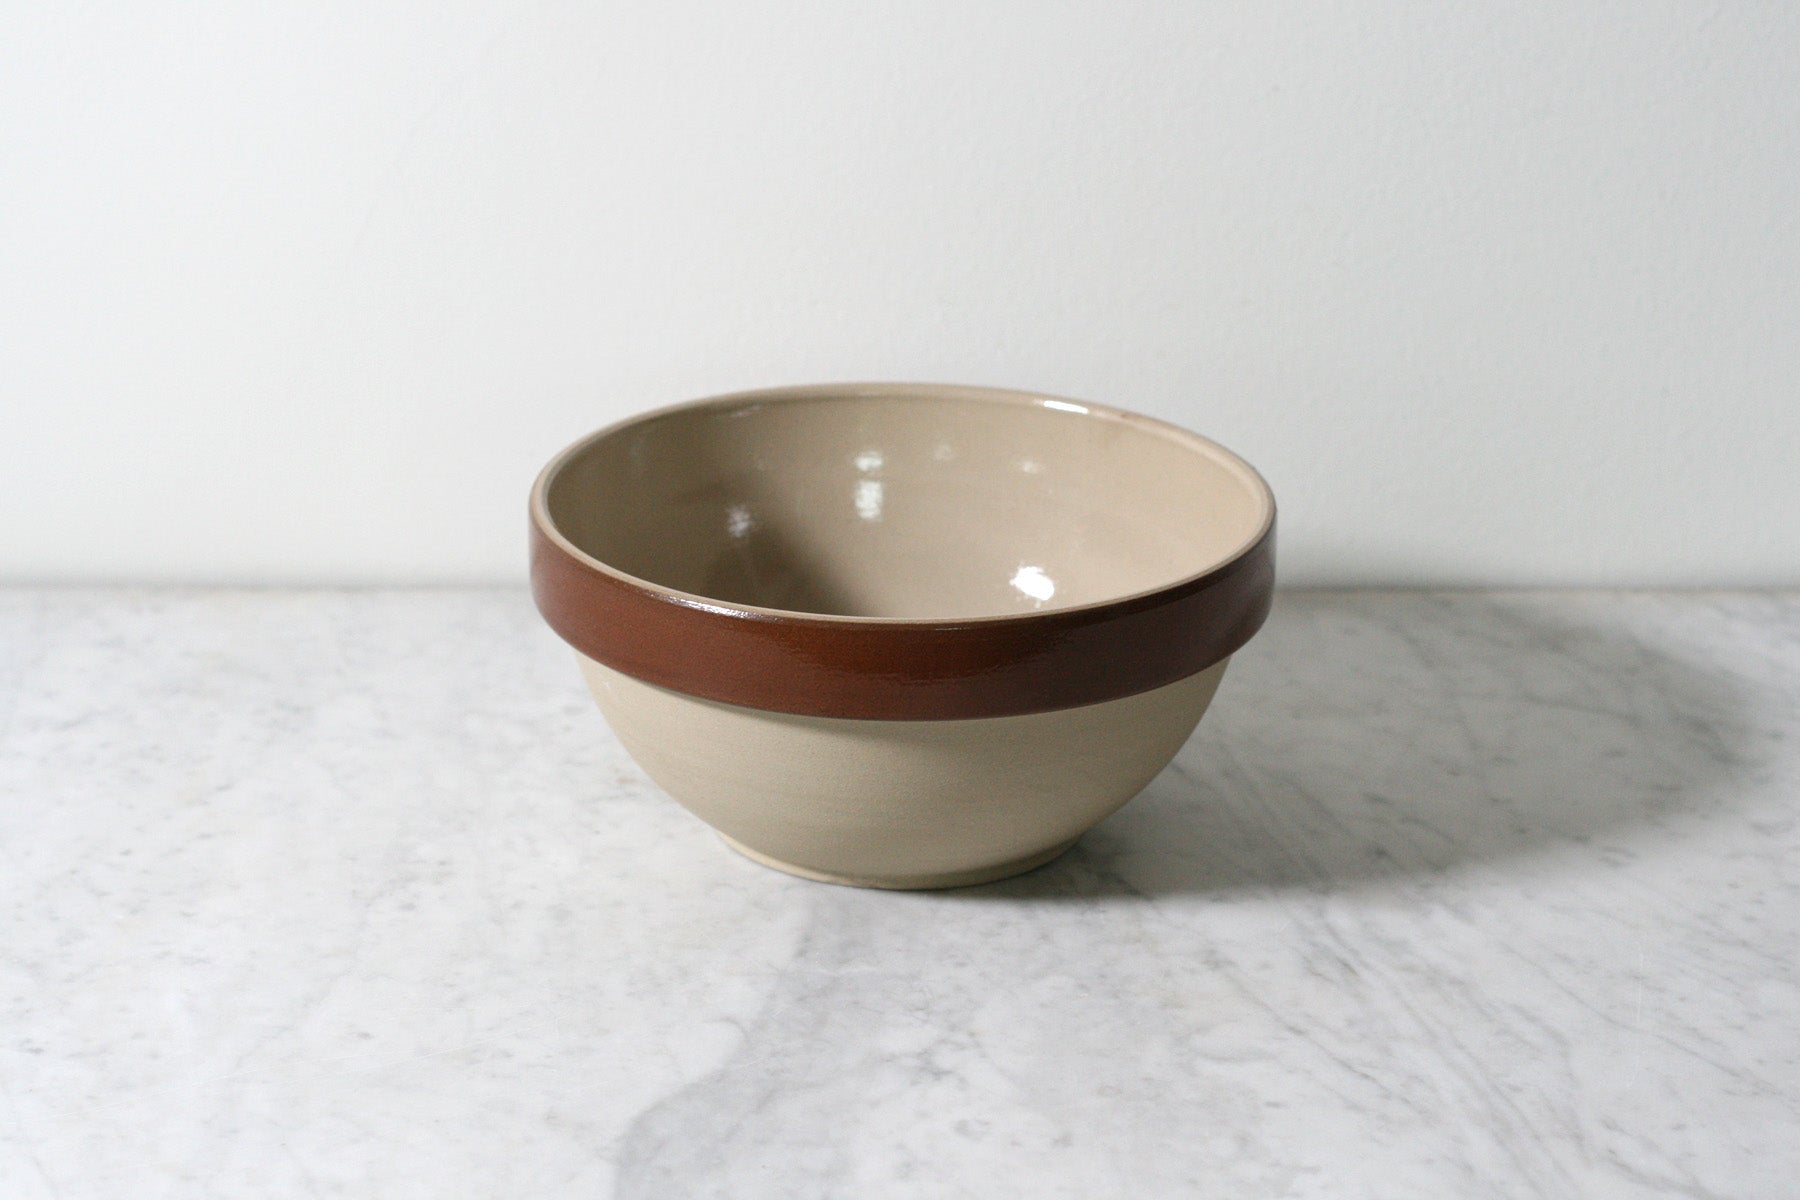 Poterie Renault French Stoneware Bowl